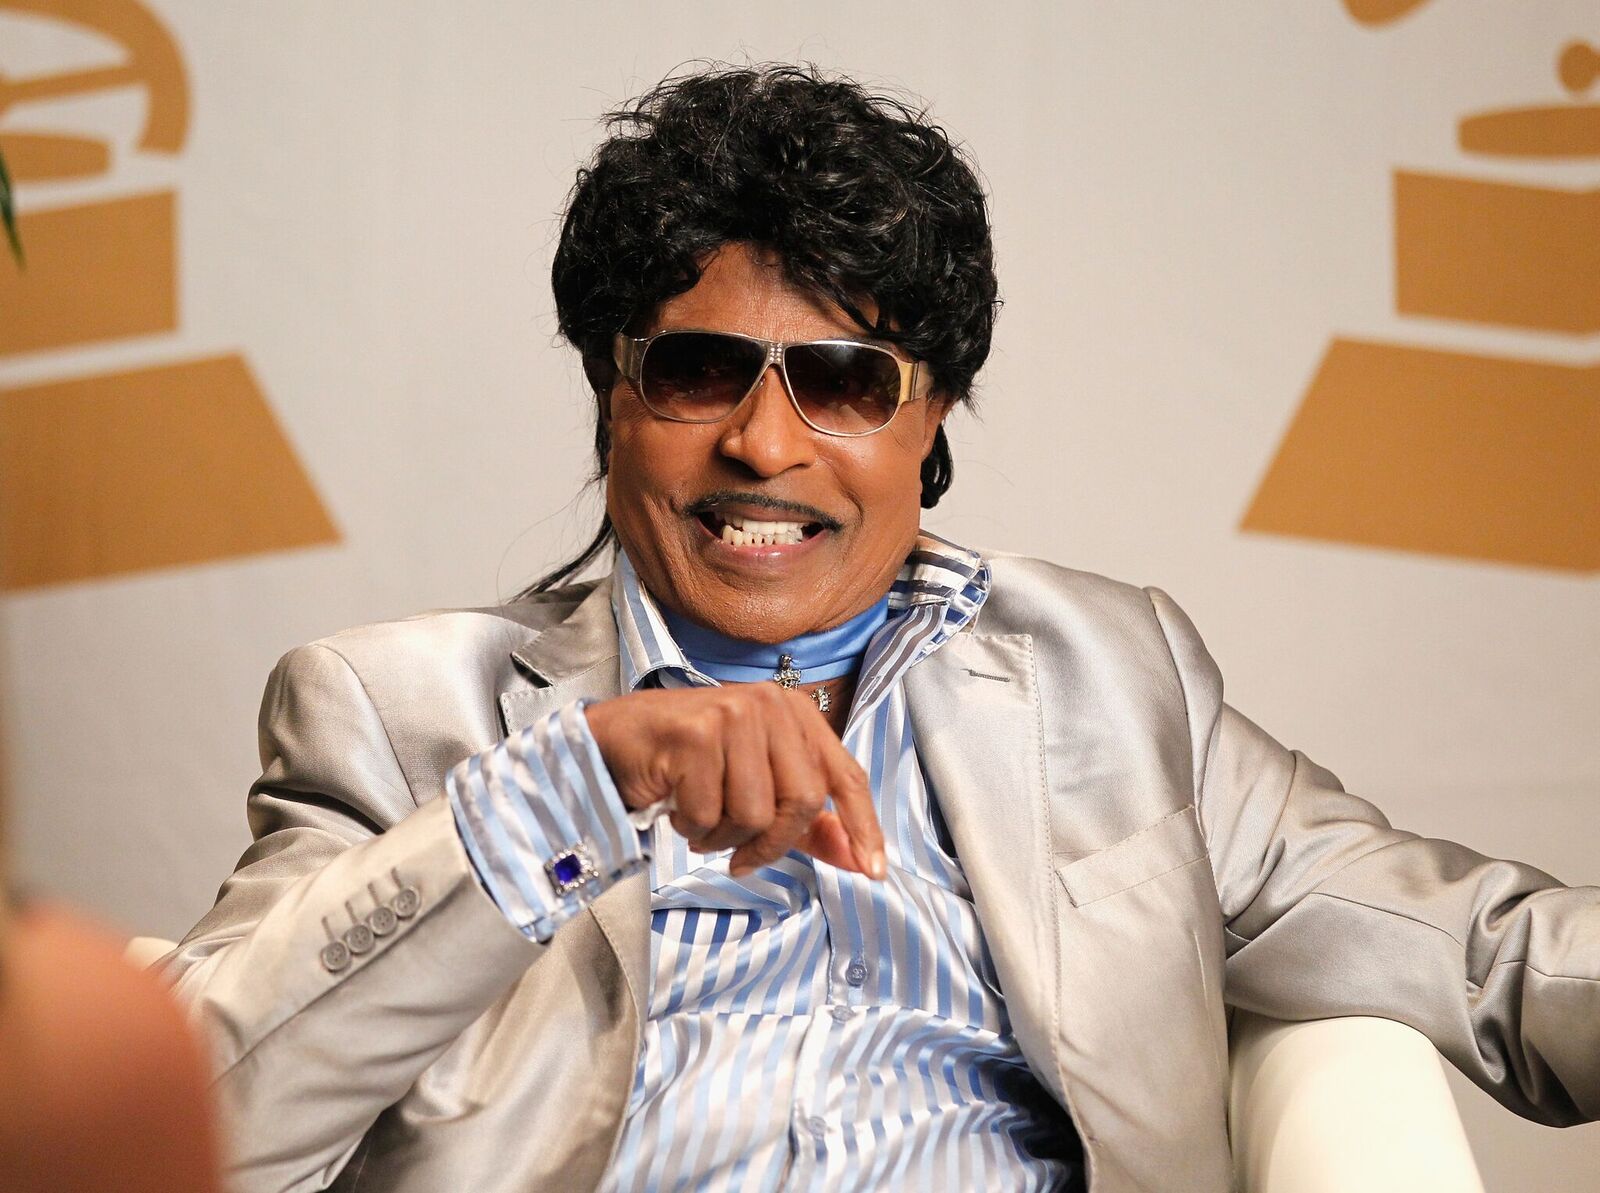 Little Richard at "The Legacy Lounge" for a conversation with CeeLo Green on September 29, 2013, in Atlanta, Georgia | Photo: Ben Rose/WireImage for NARAS/Getty Images